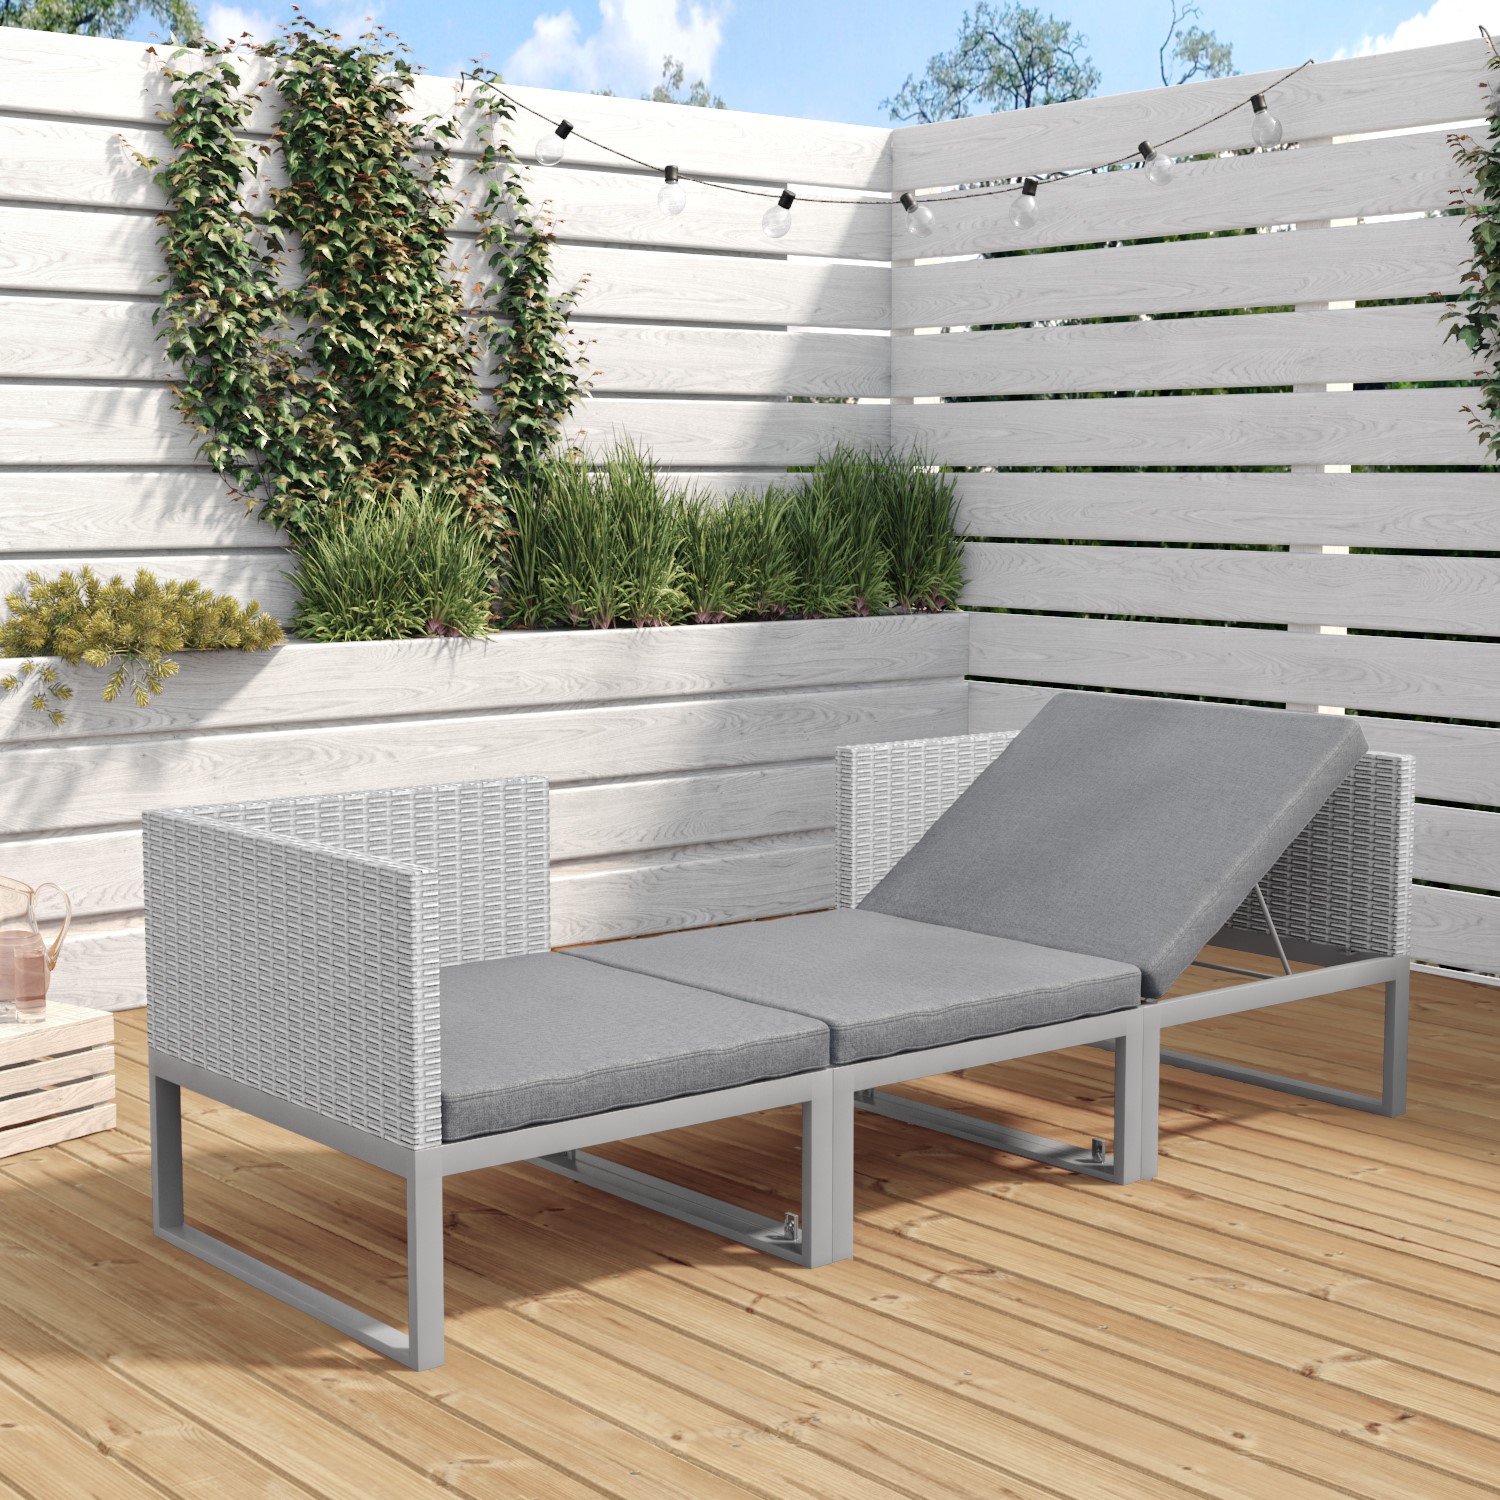 Read more about 2 seater grey garden rattan modular bistro set & lounger fortrose